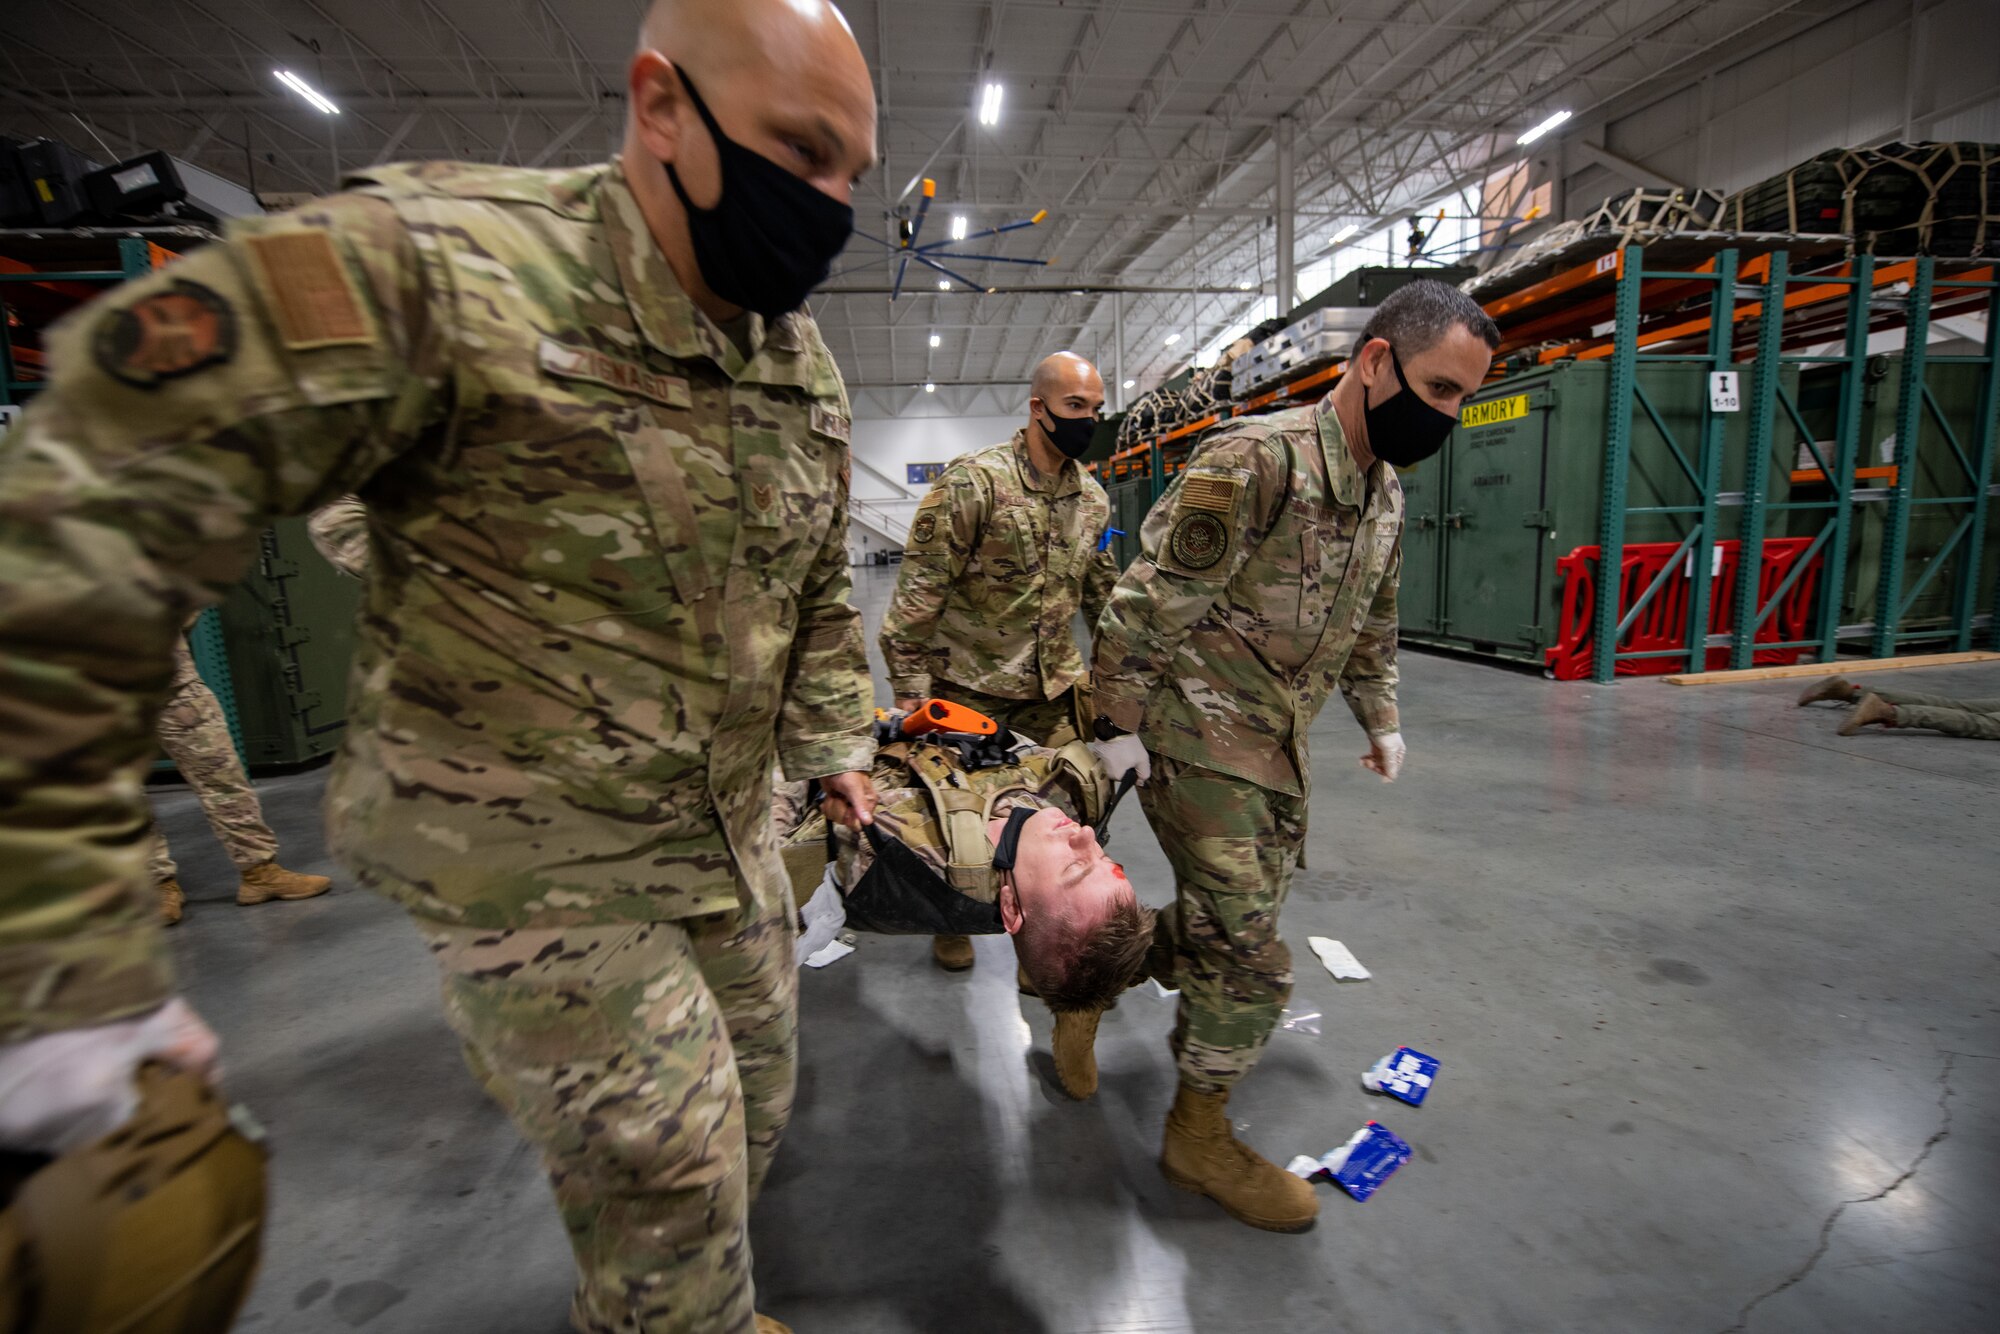 Three military members help to hand-carry a fourth on a stretcher inside of a warehouse with fluorescent lights